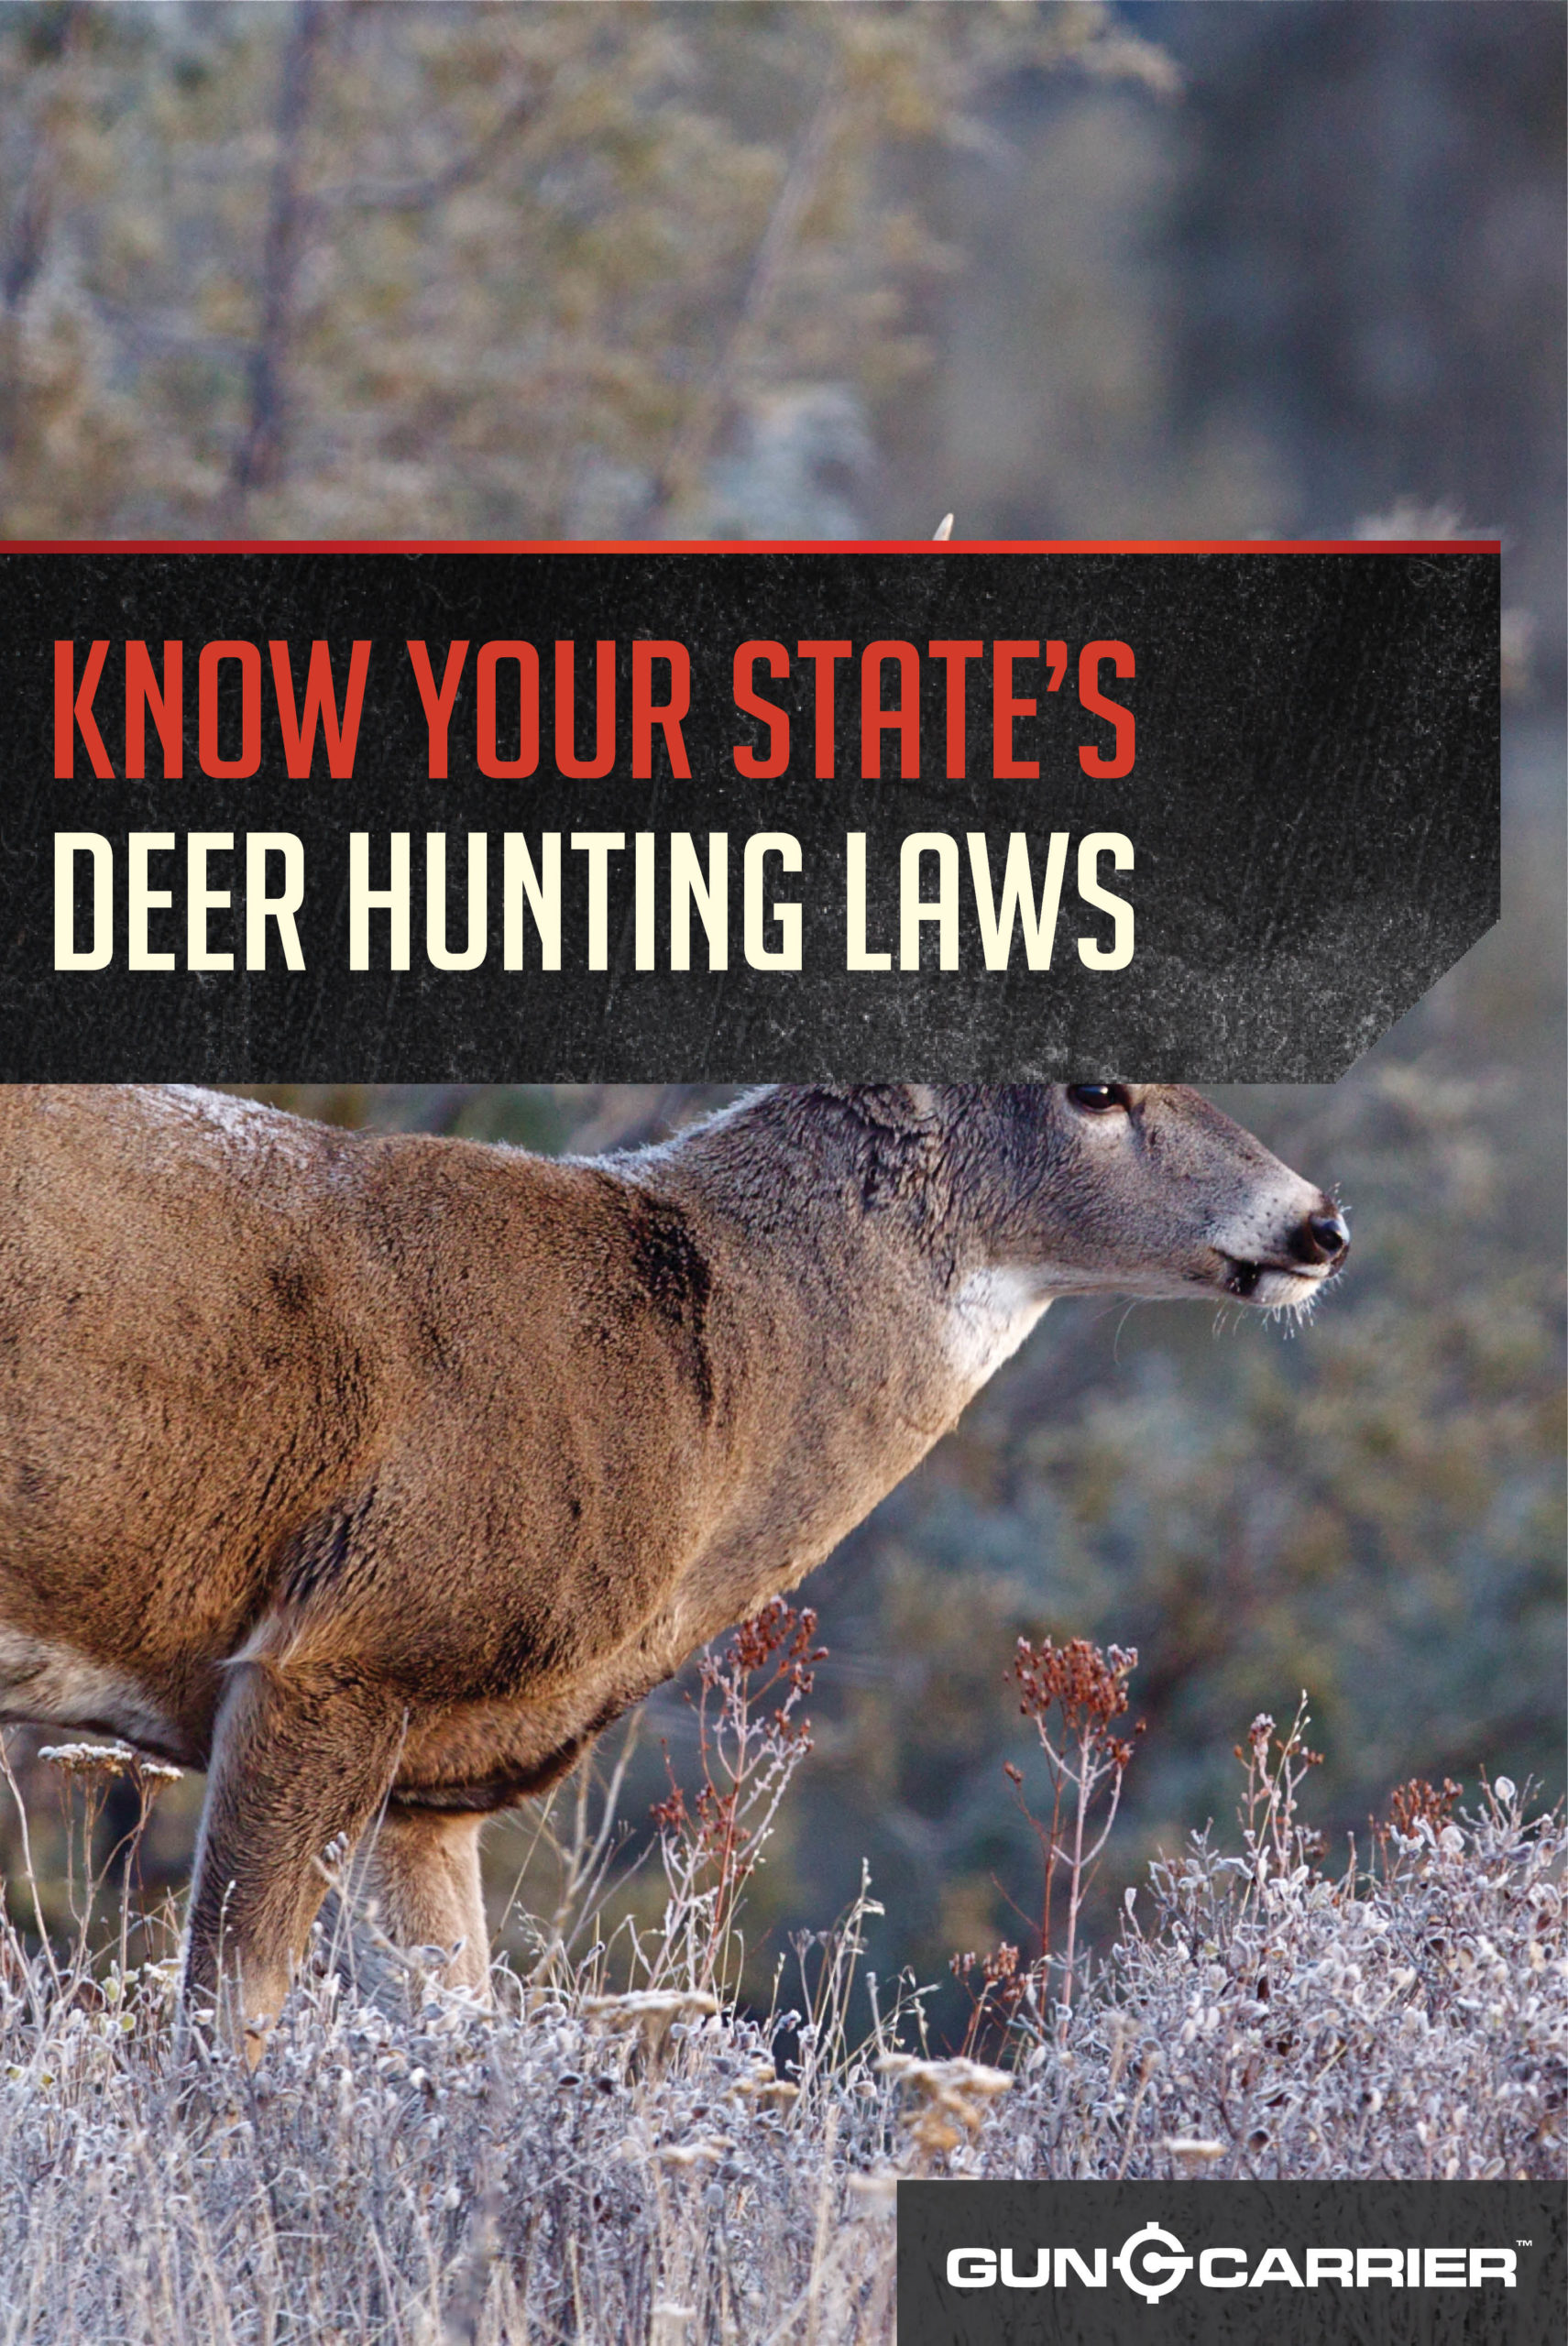 Hunting Laws | Deer Season and Hunting Laws by State by Gun Carrier at https://guncarrier.com/hunting-laws-deer-season-by-state